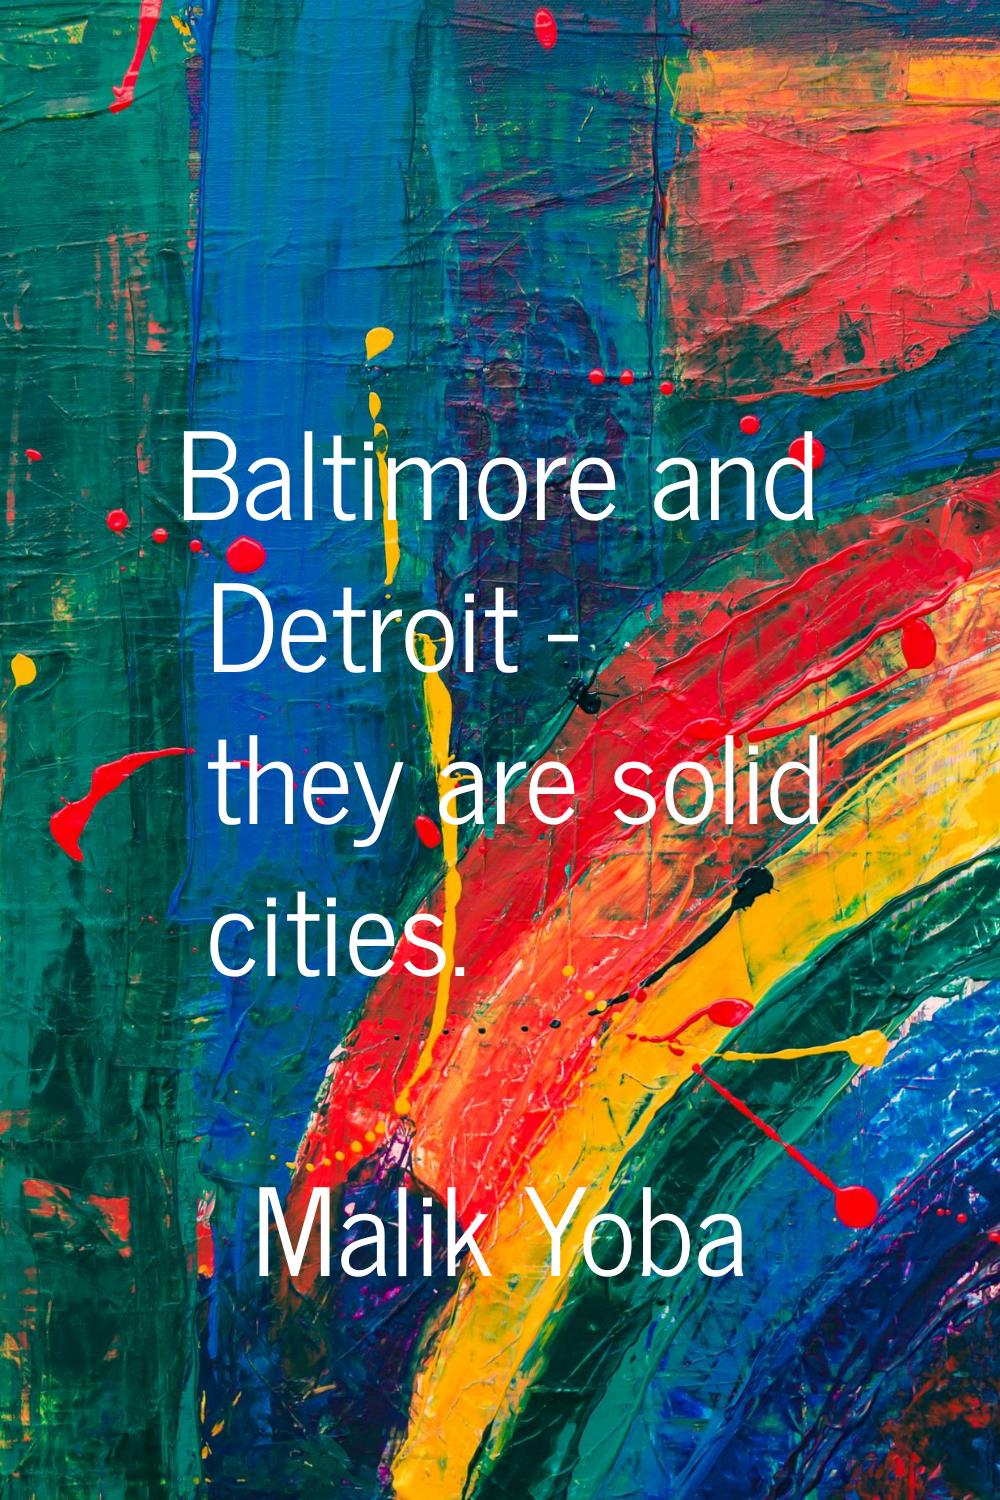 Baltimore and Detroit - they are solid cities.